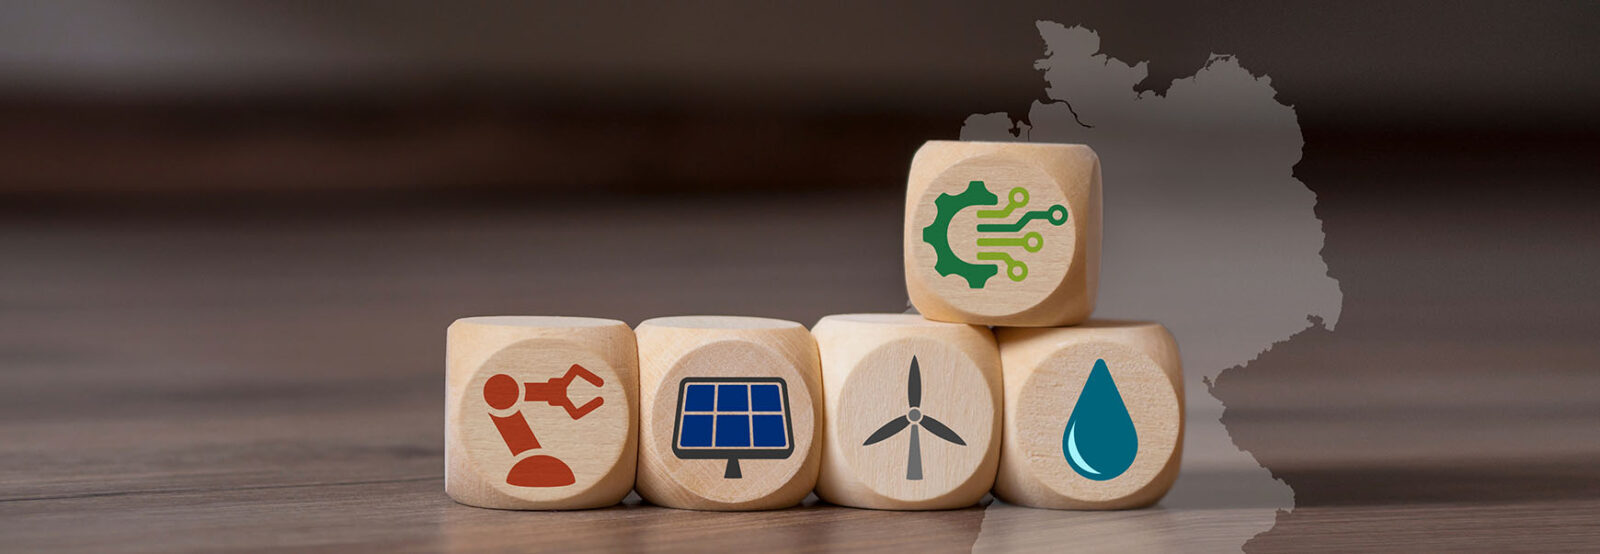 Five wooden cubes with symbols for digitalization and renewable energies lie on a wooden table.